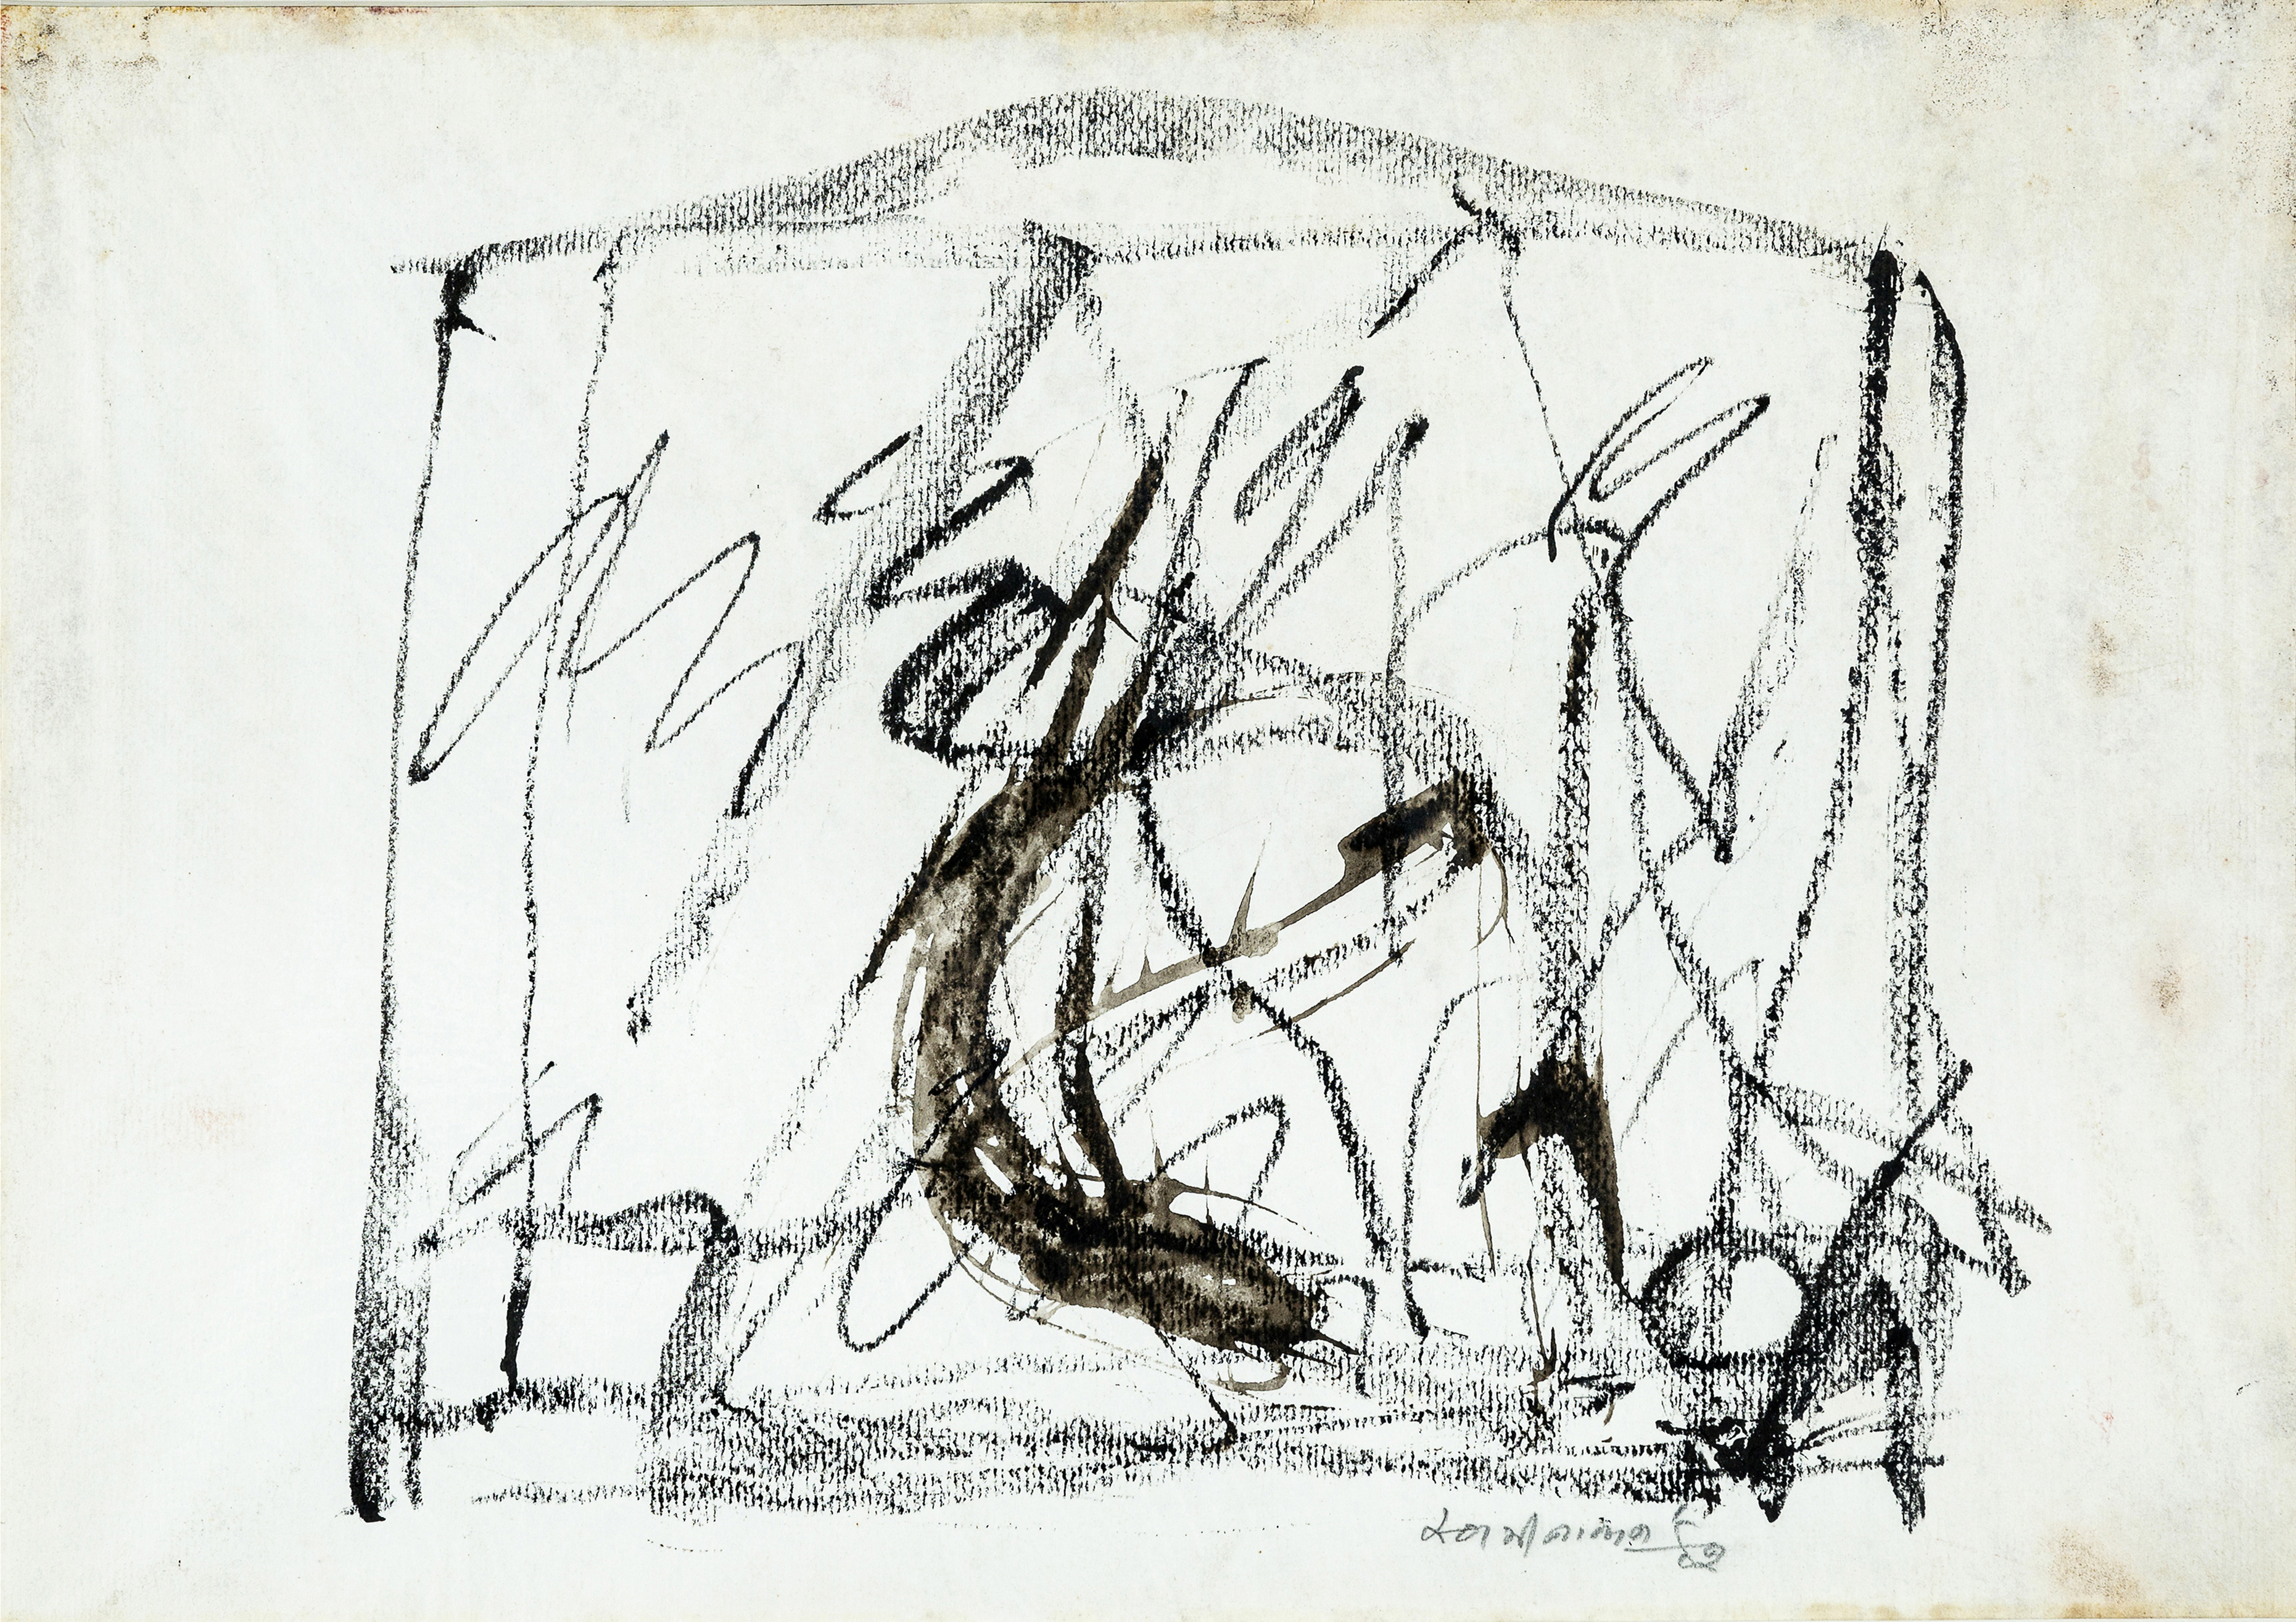 JAGDISH SWAMINATHAN, UNTITLED, 1992, SIGNED & DATED "SWAMINATHAN 92" LOWER RIGHT, MIXED MEDIA ON PAP